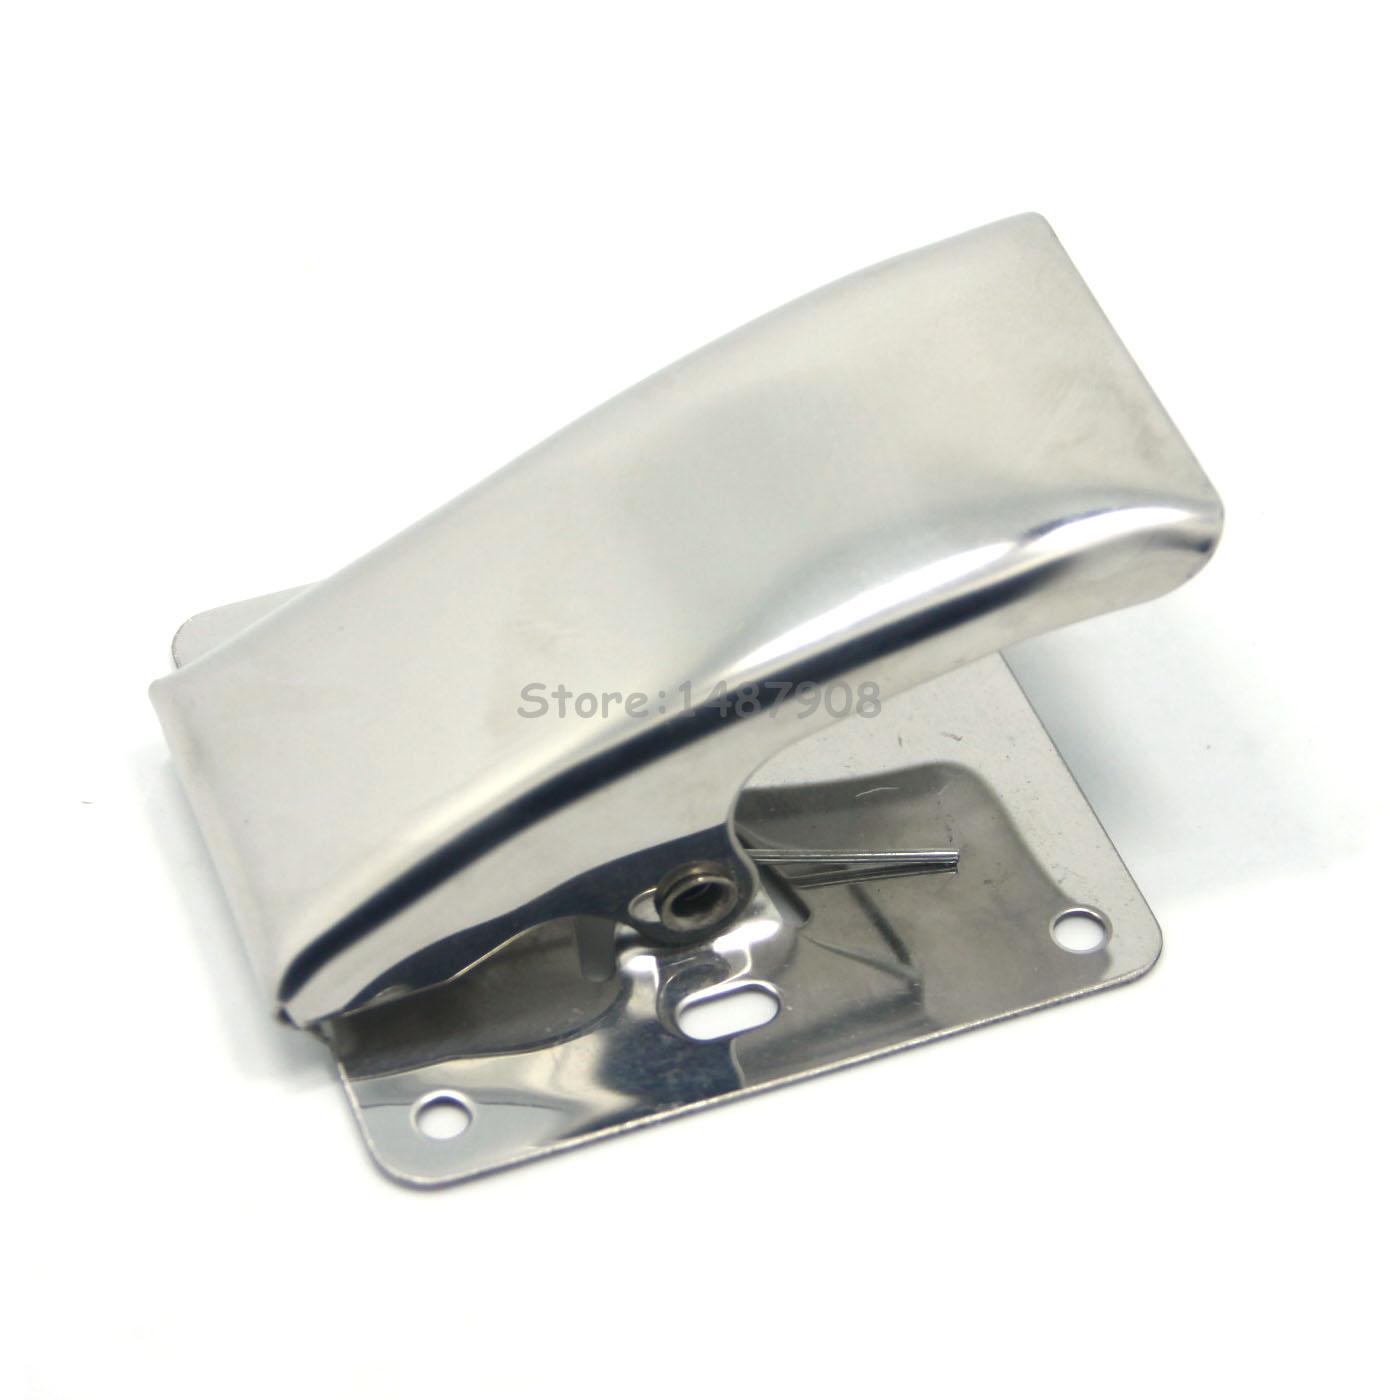 Fishing Fillet Board Repair Part Stainless Steel Fillet Clamp Fish Clips For Cleaning Fillet & Bait Fishing Boards A076